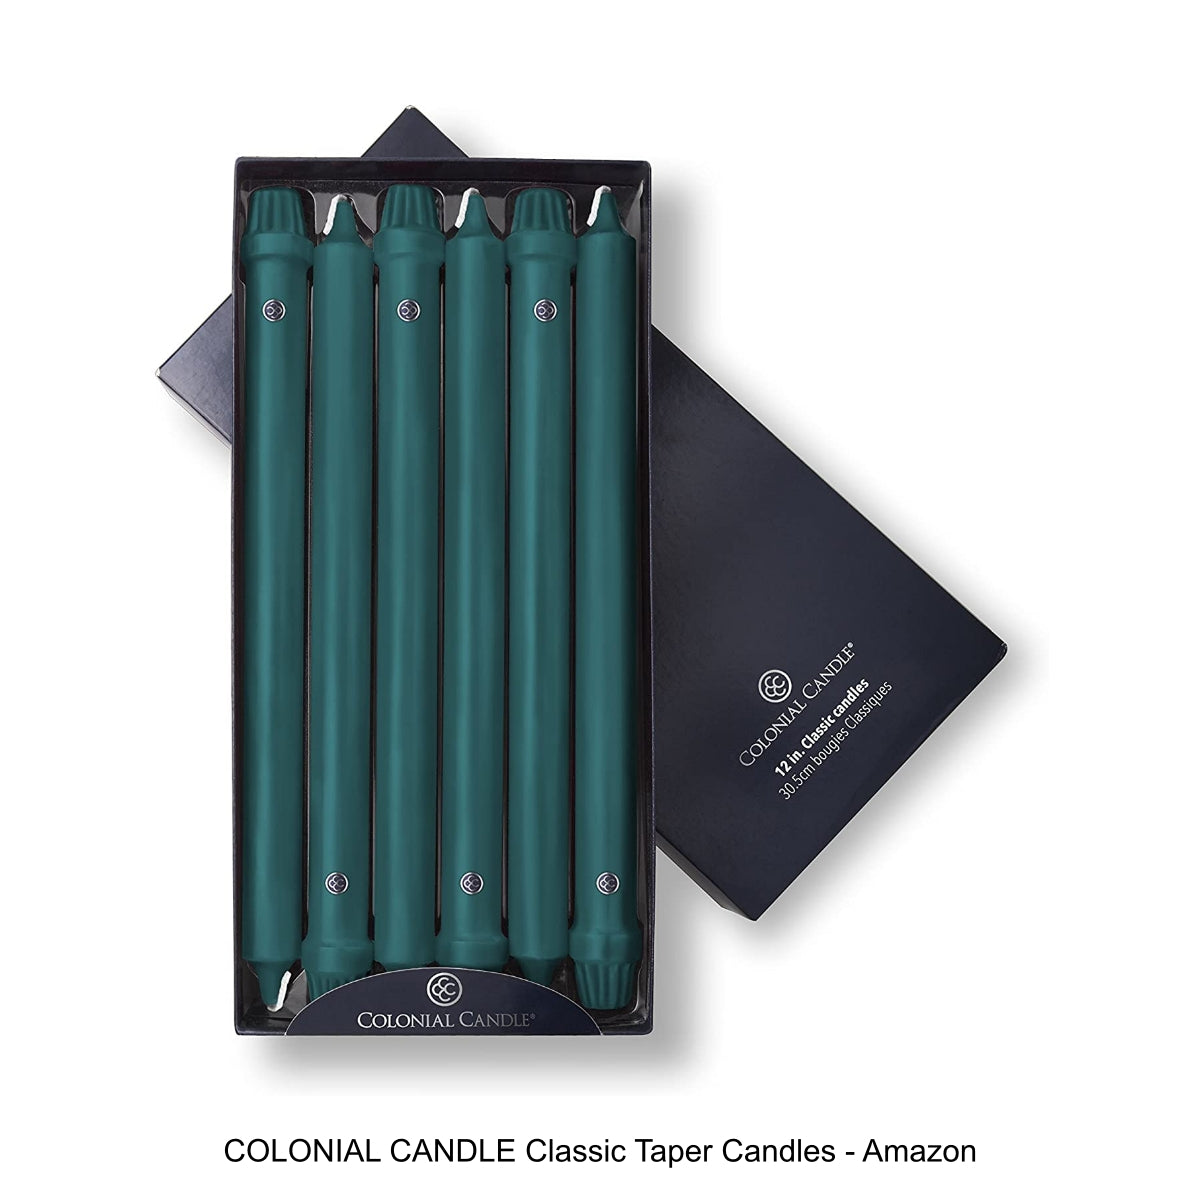 COLONIAL CANDLE Classic Taper Candles - Amazon